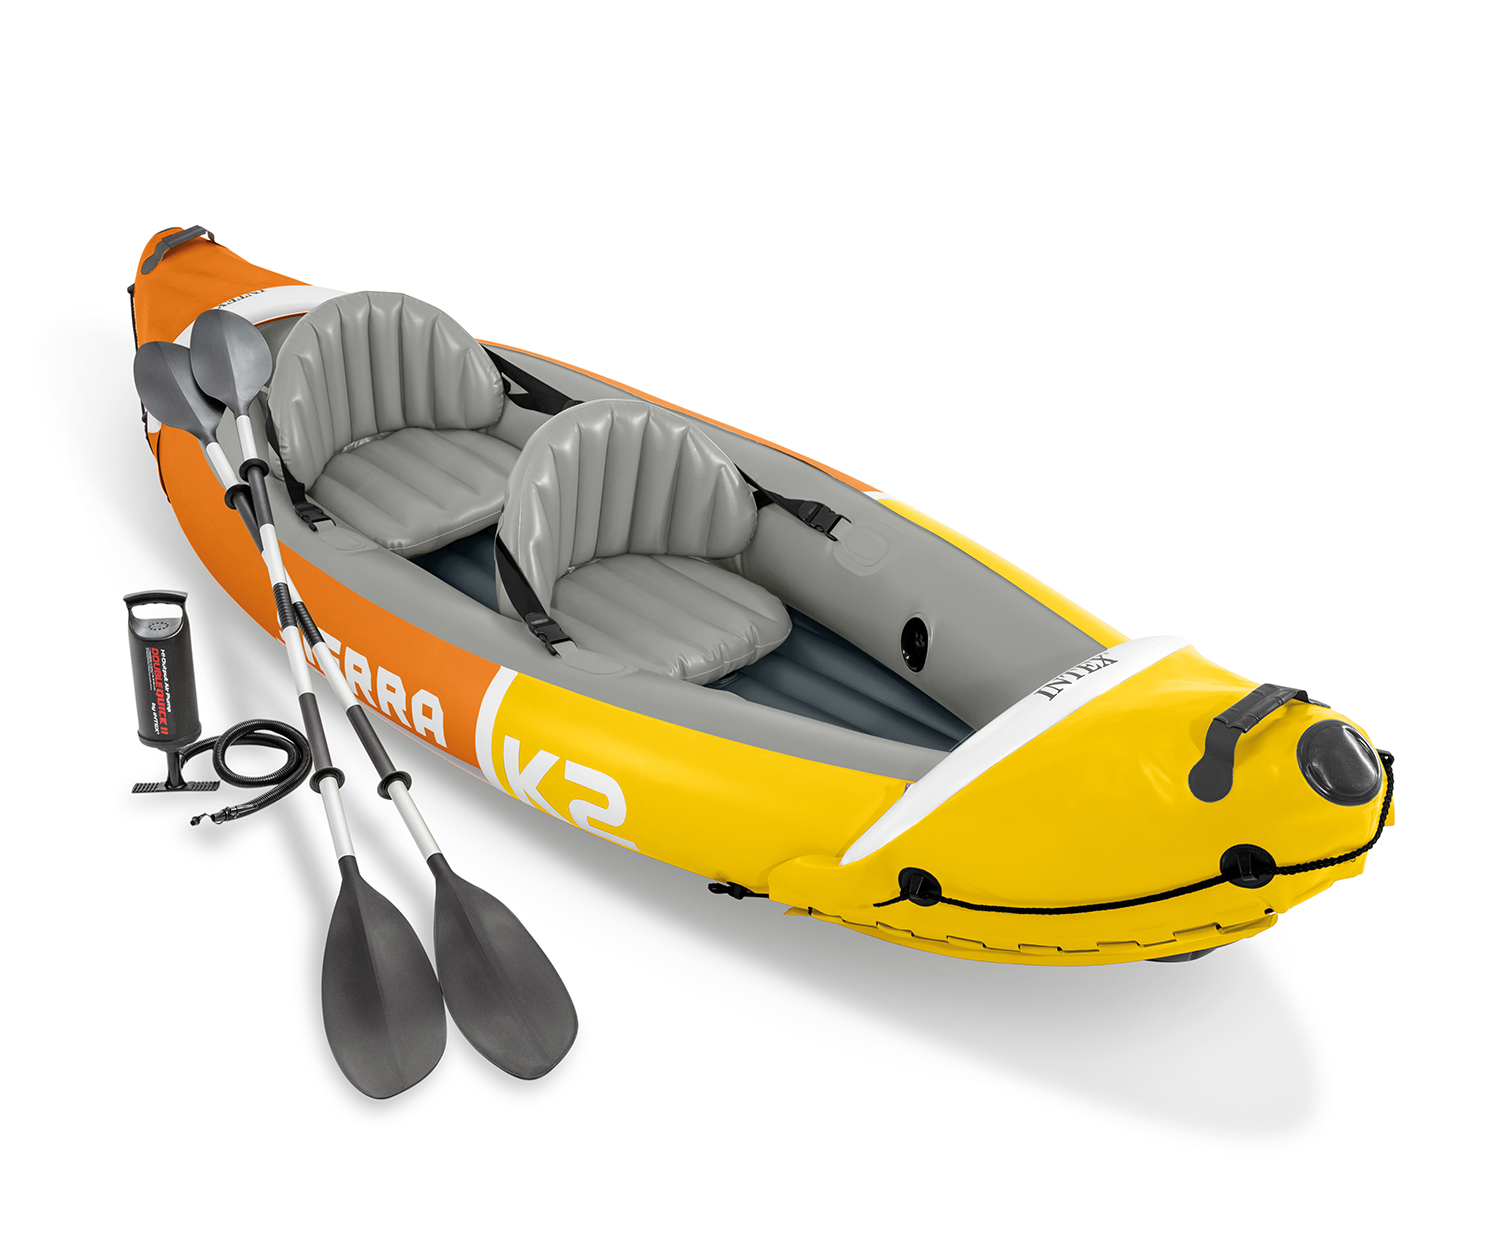 Intex Sierra K2 Inflatable Kayak with Oars and Hand Pump - image 1 of 12